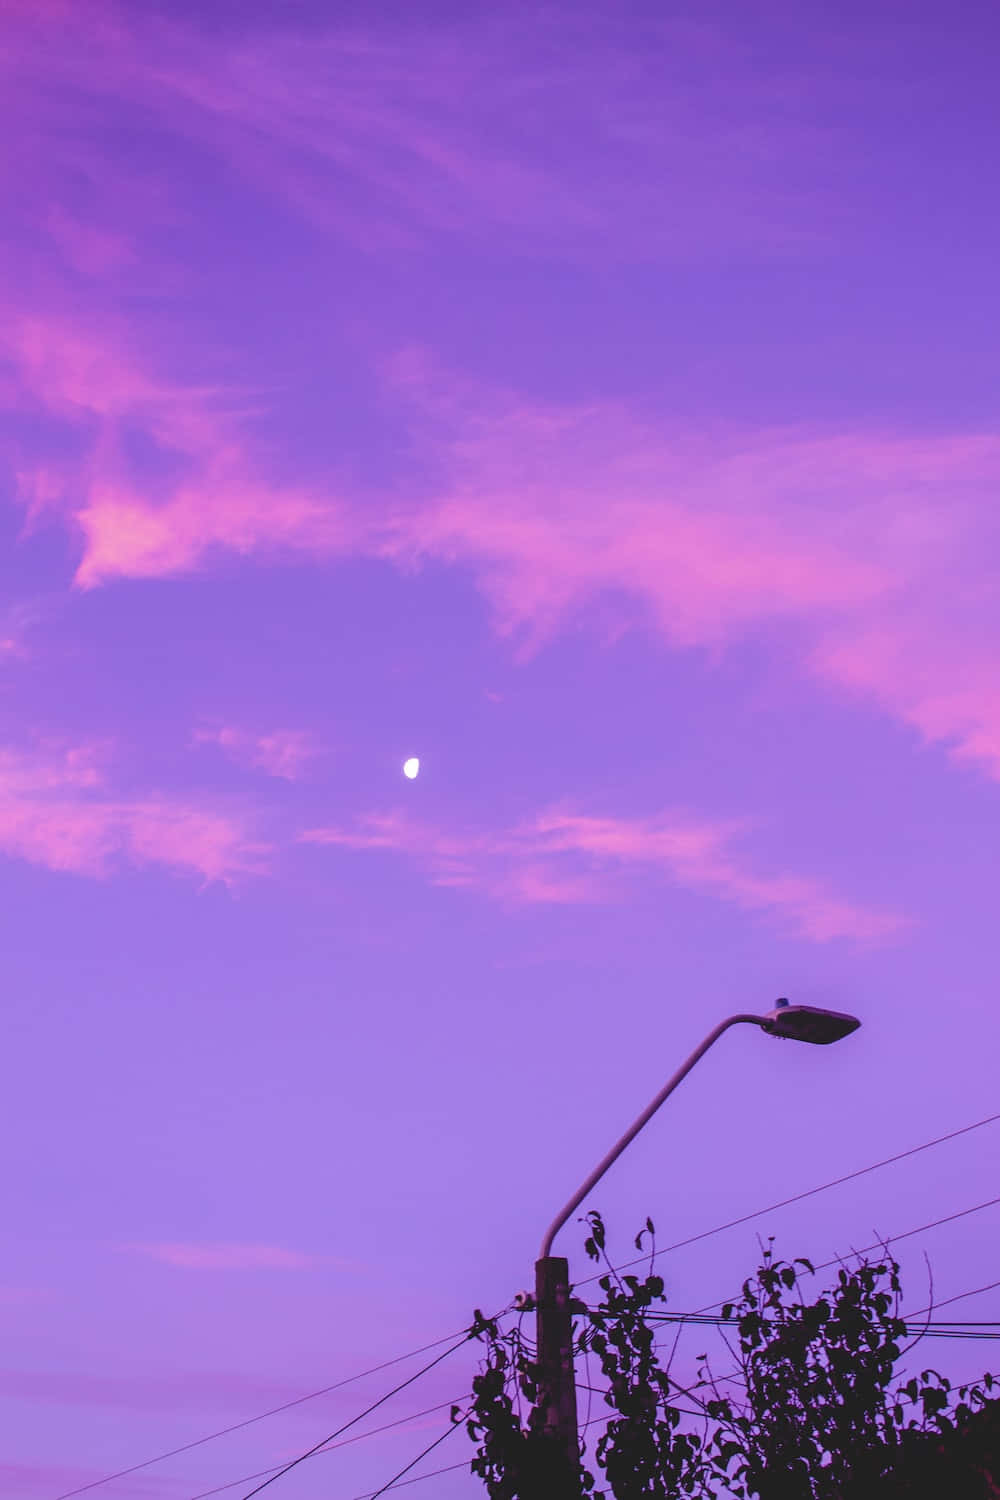 Purple Aesthetic Cloudy Sky With Shadows Picture